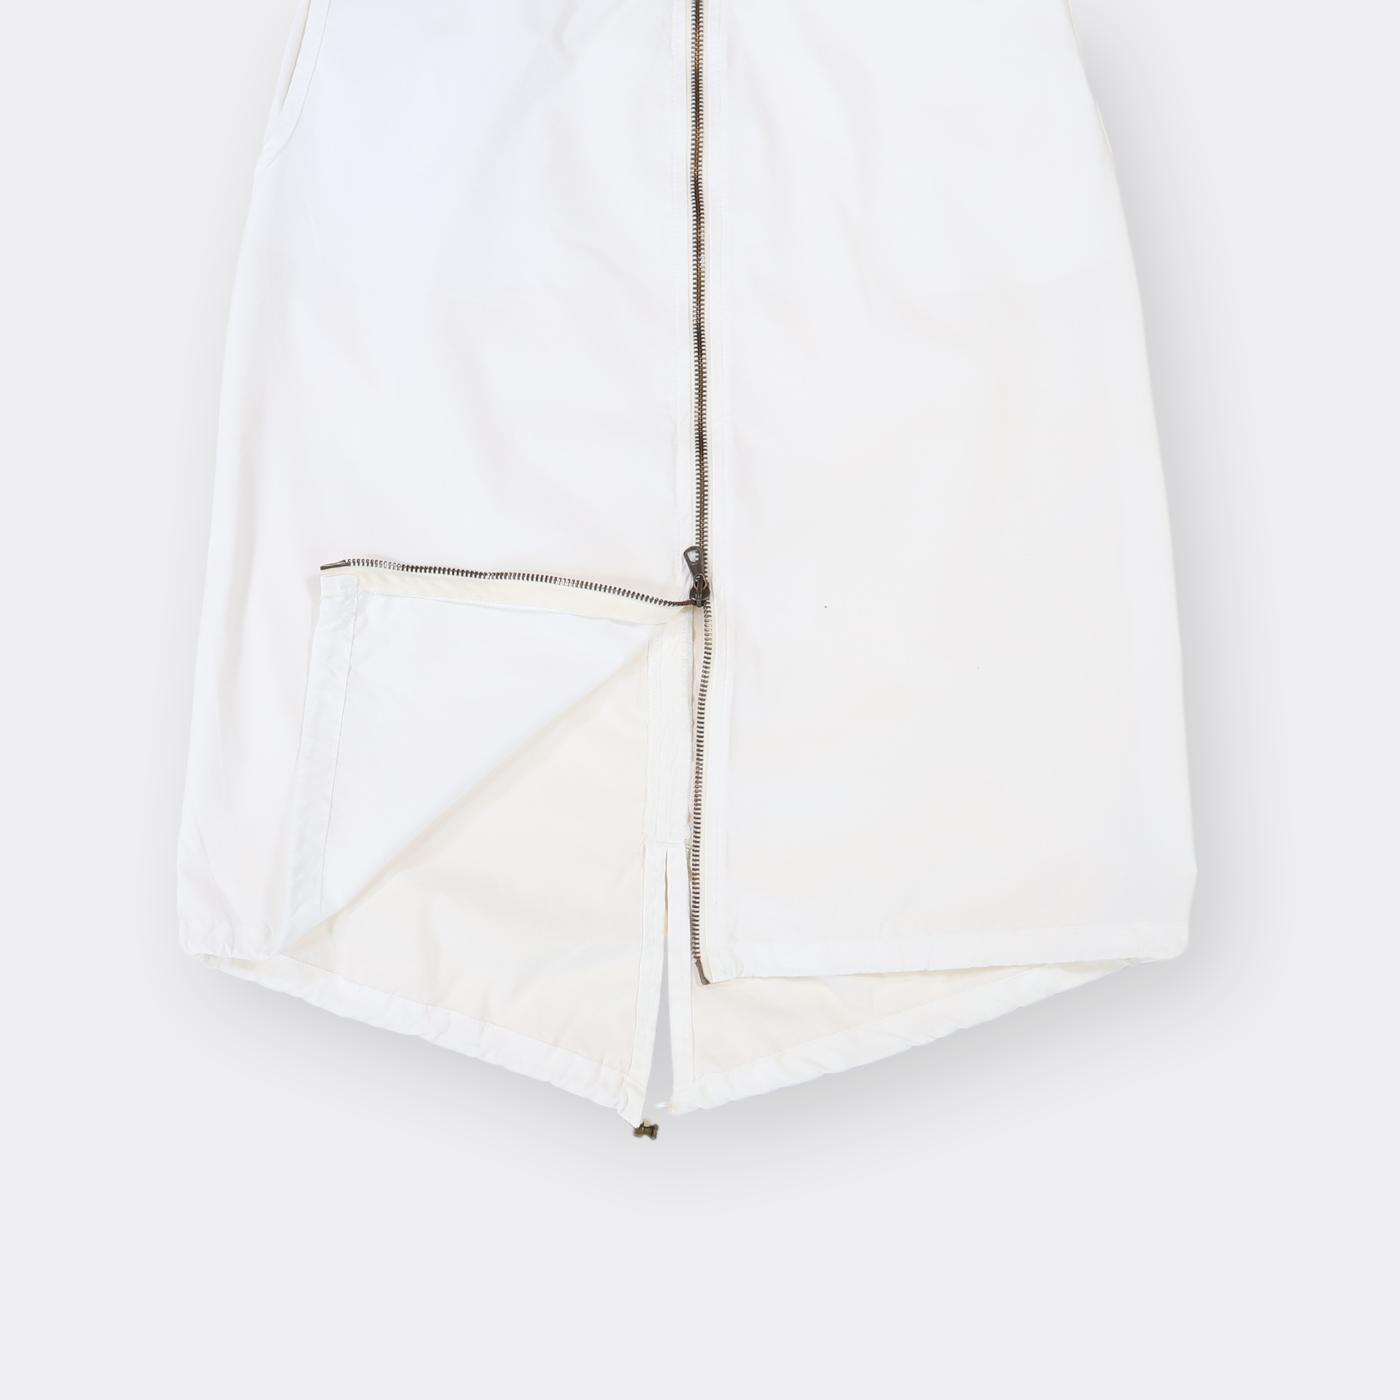 Moncler Vintage Skirt - 29" x 24" - Known Source